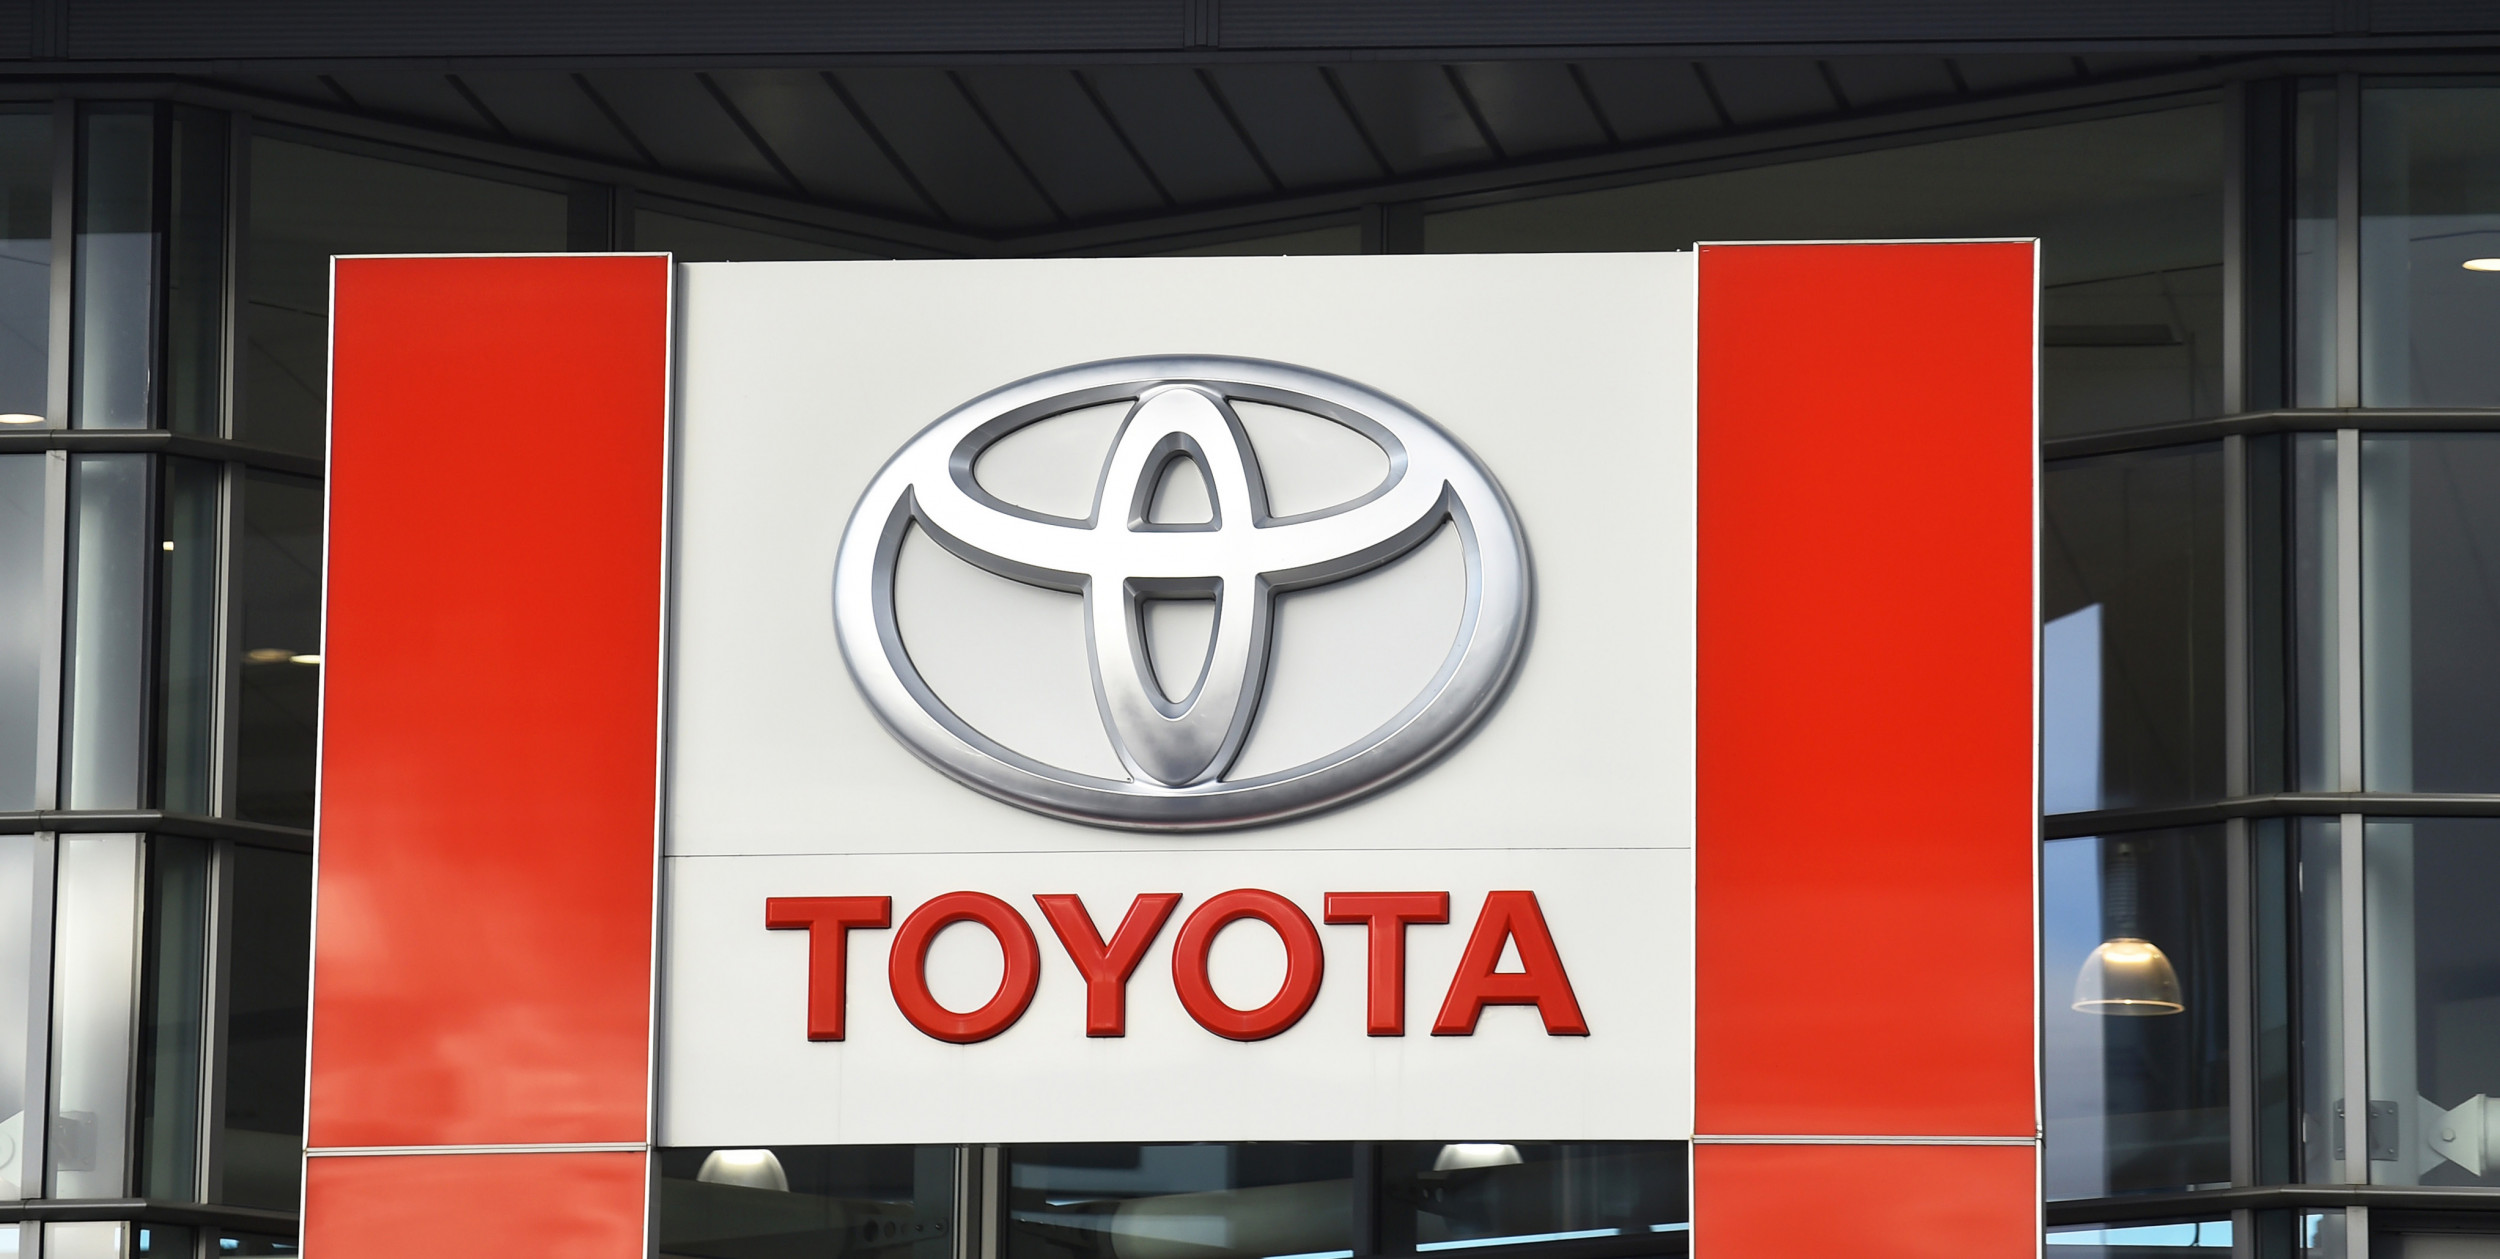 Toyota Vows Change After Overworked and Harassed Employee Dies By